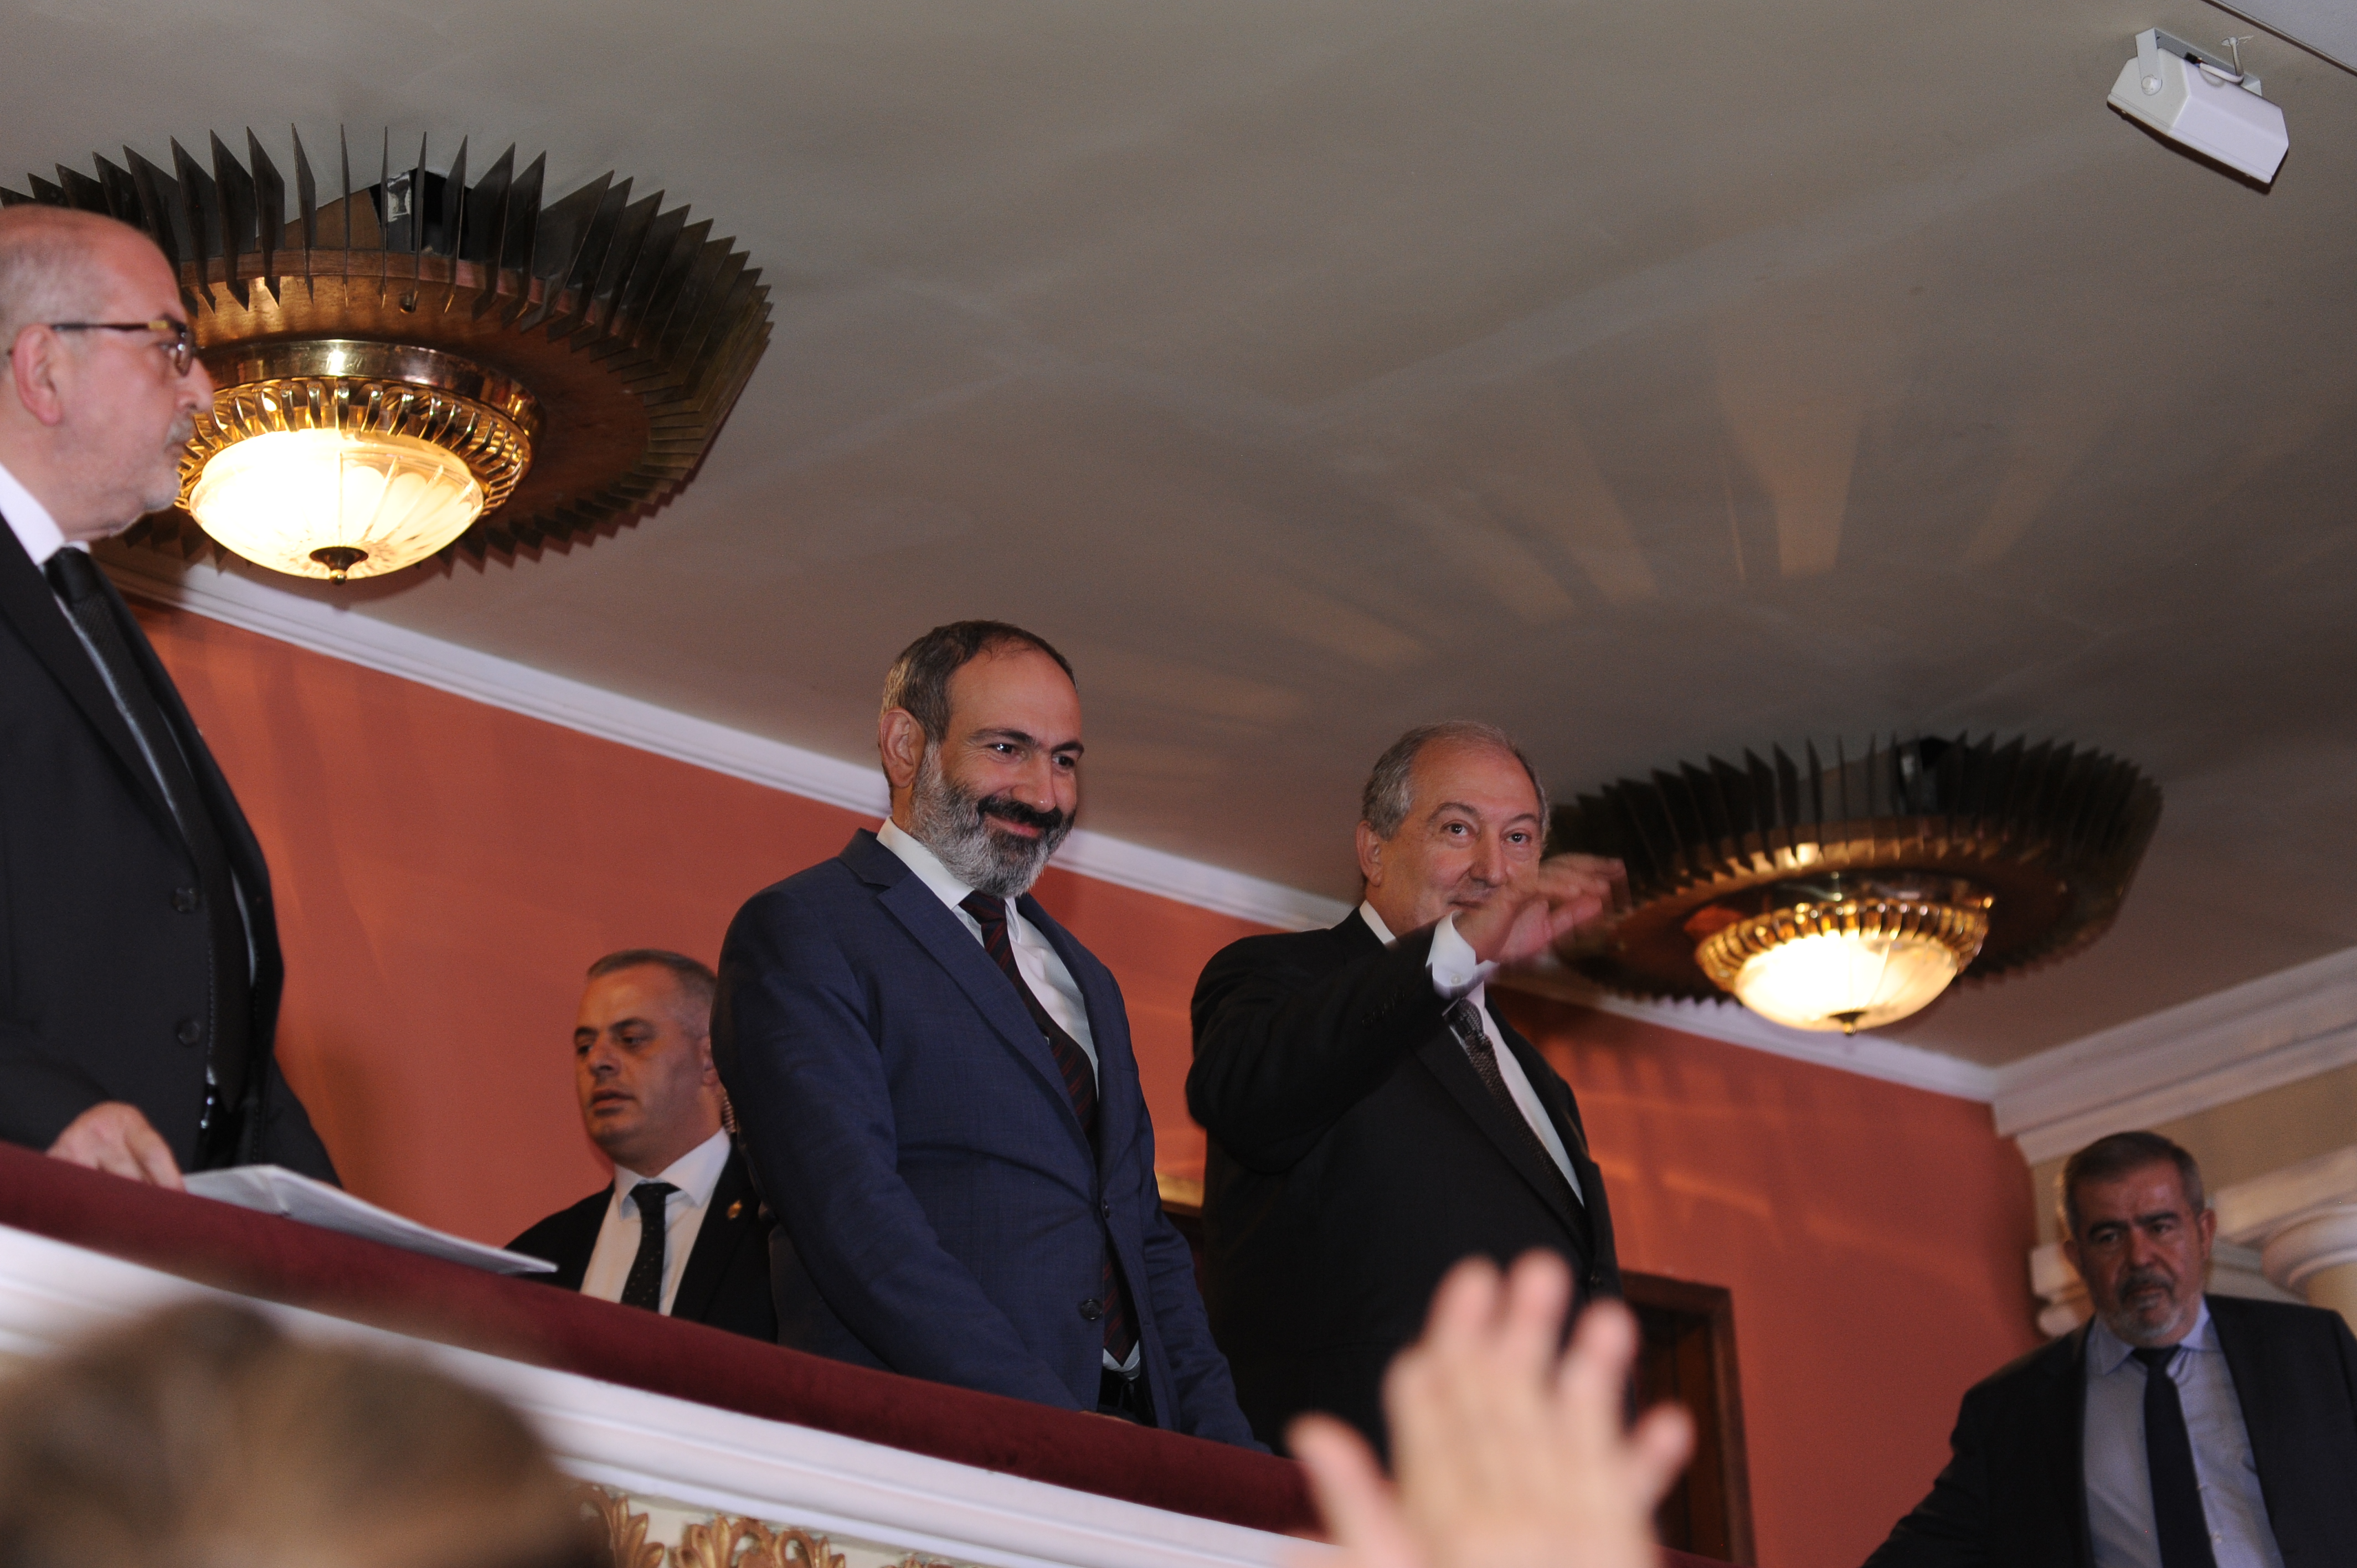 President was presented at the festive event dedicated to the 100th anniversary of Homenetmen